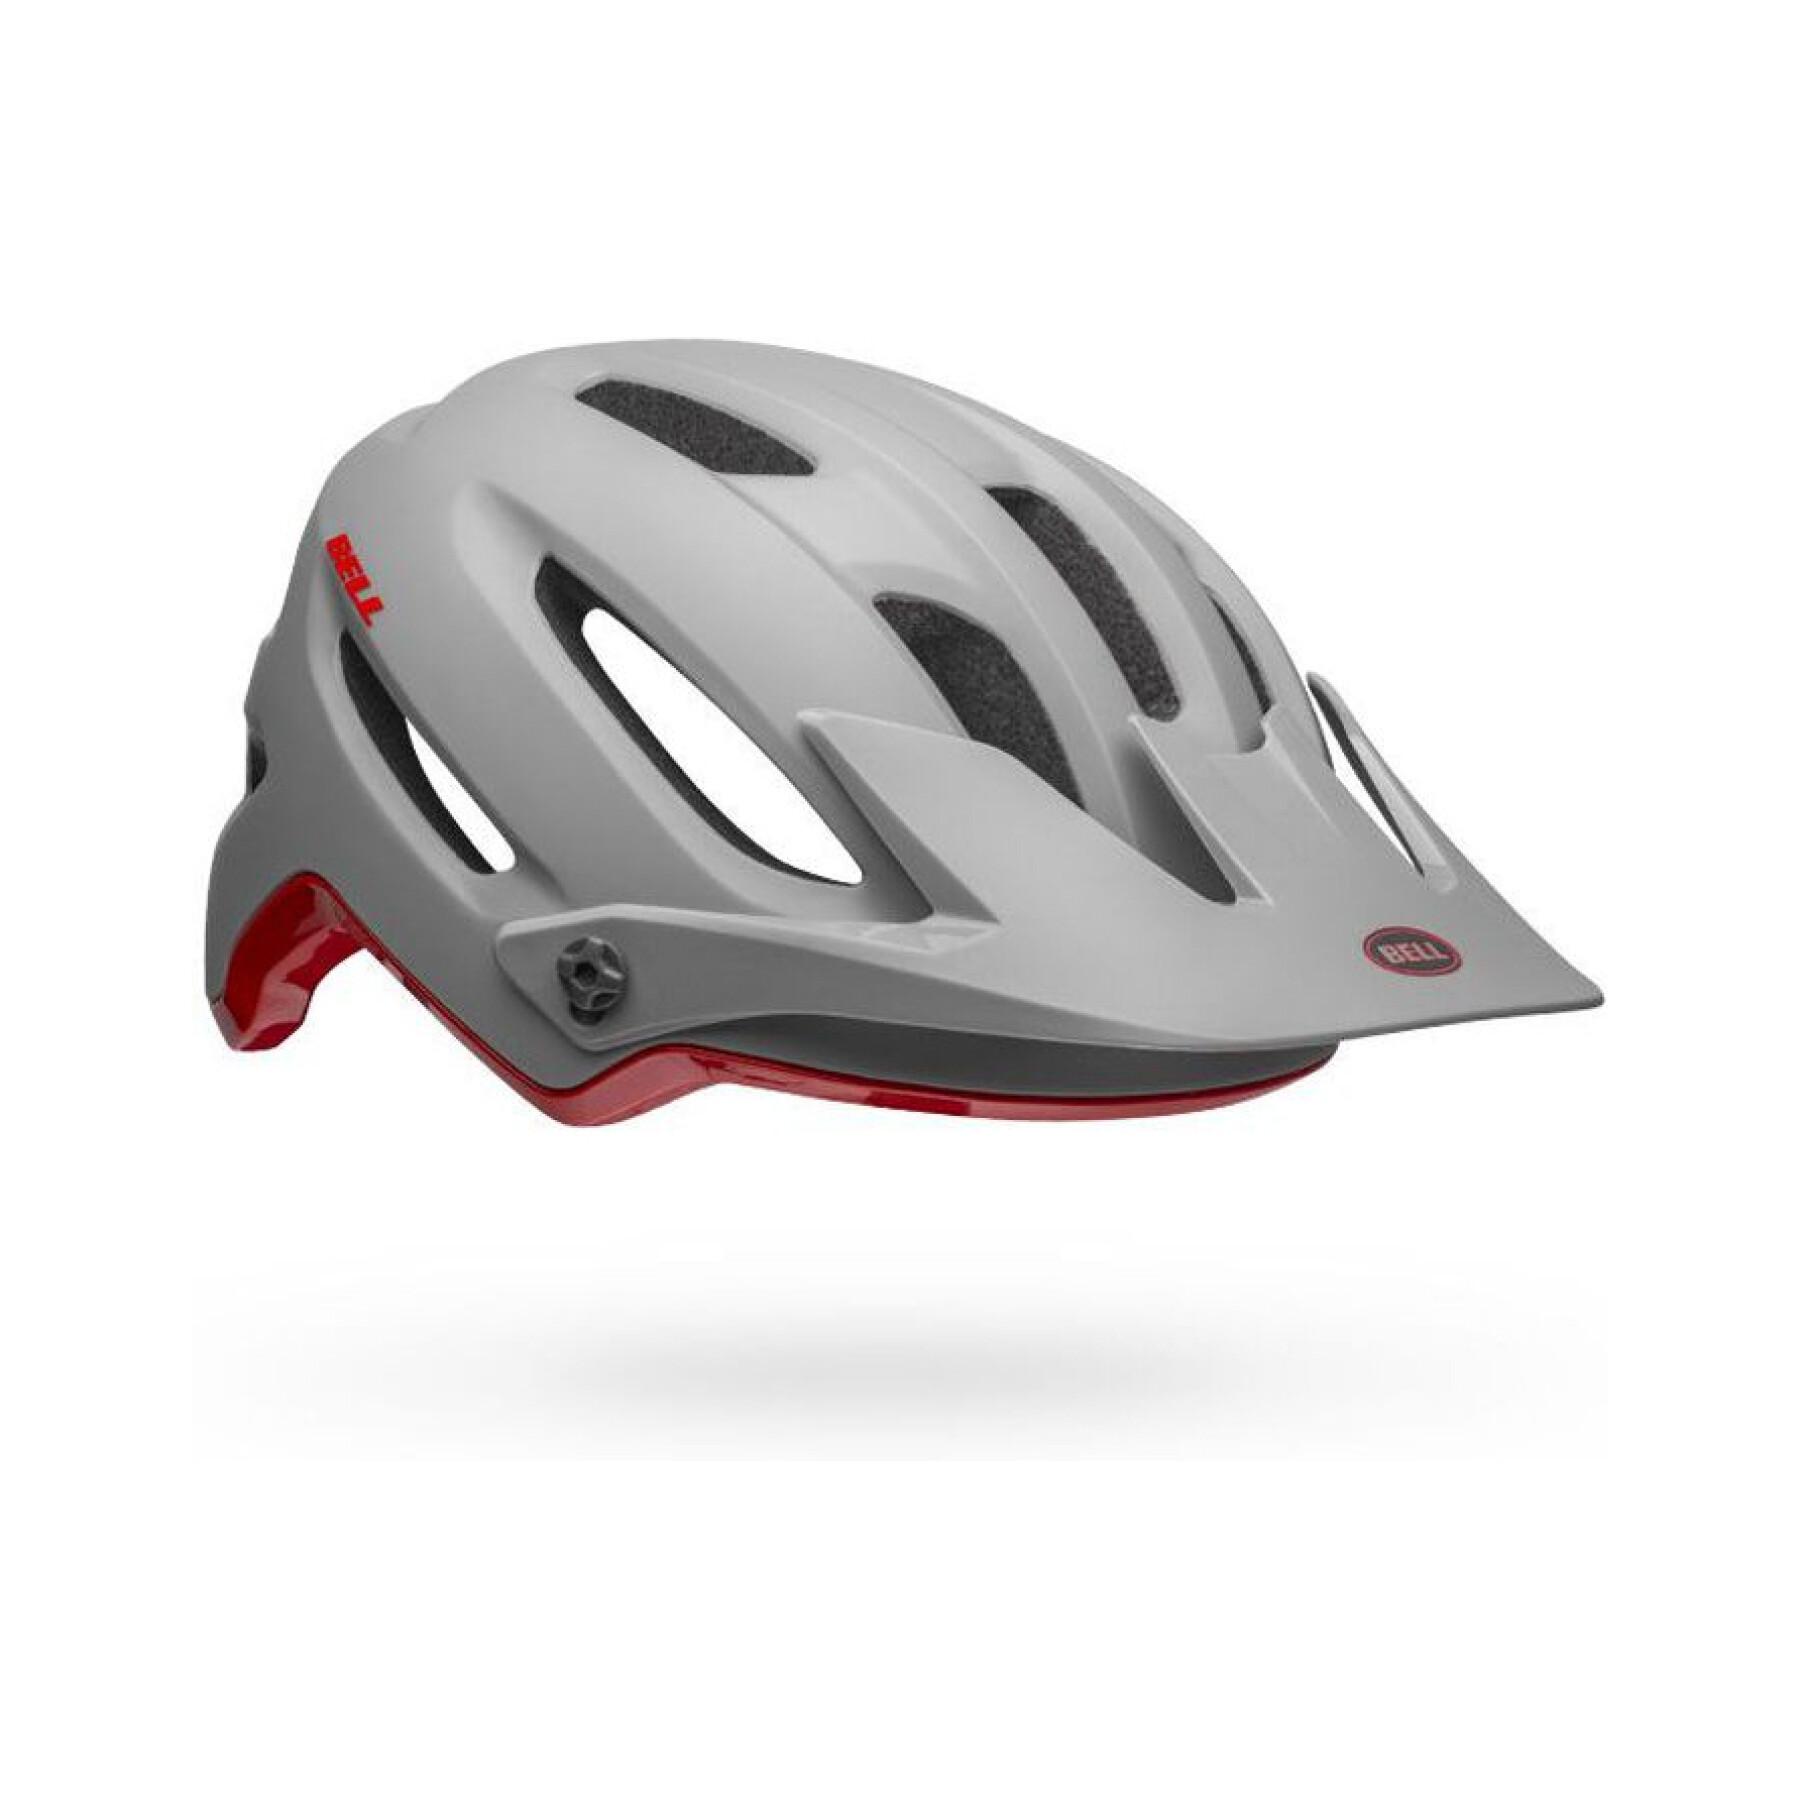 Casque vélo Bell 4Forty Mips